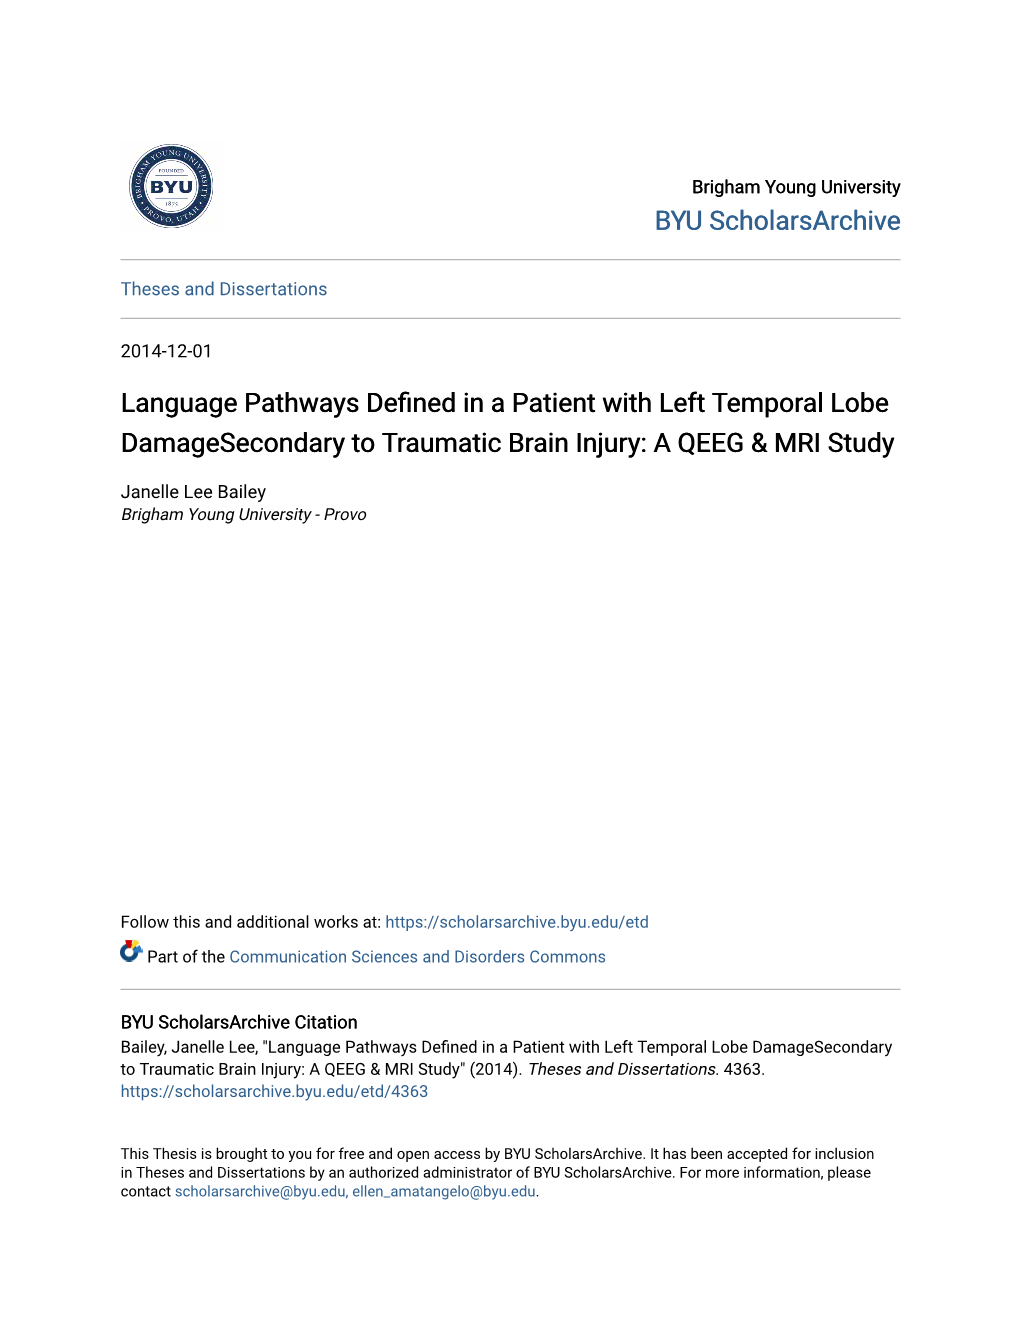 Language Pathways Defined in a Patient with Left Temporal Lobe Damage